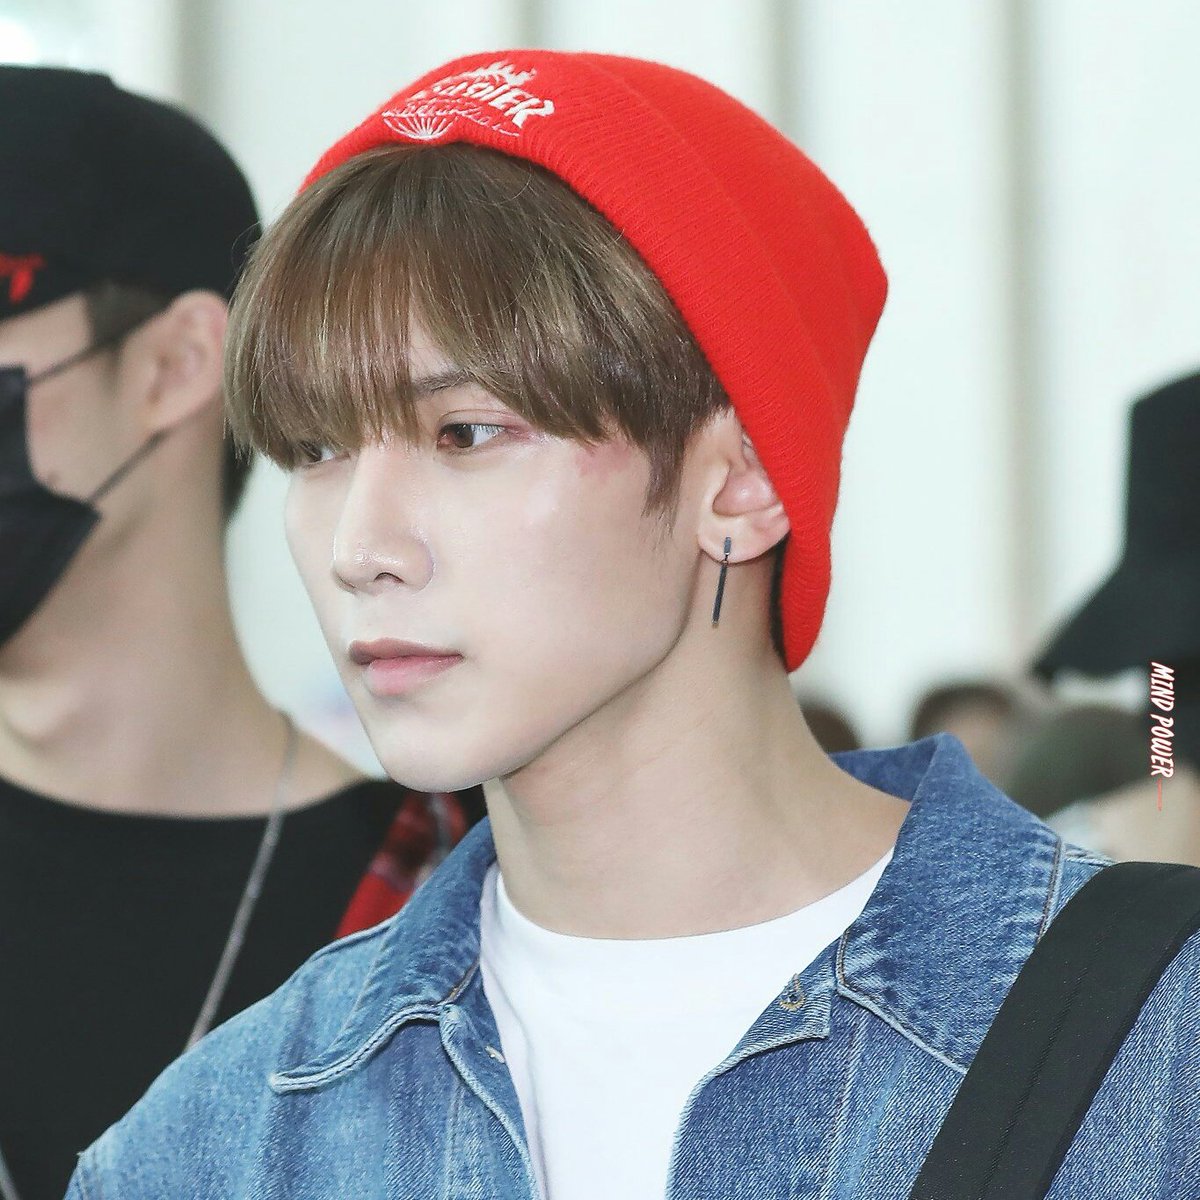 yeosang as po• small baby• loves their scooter/skateboard• probably low key sassy